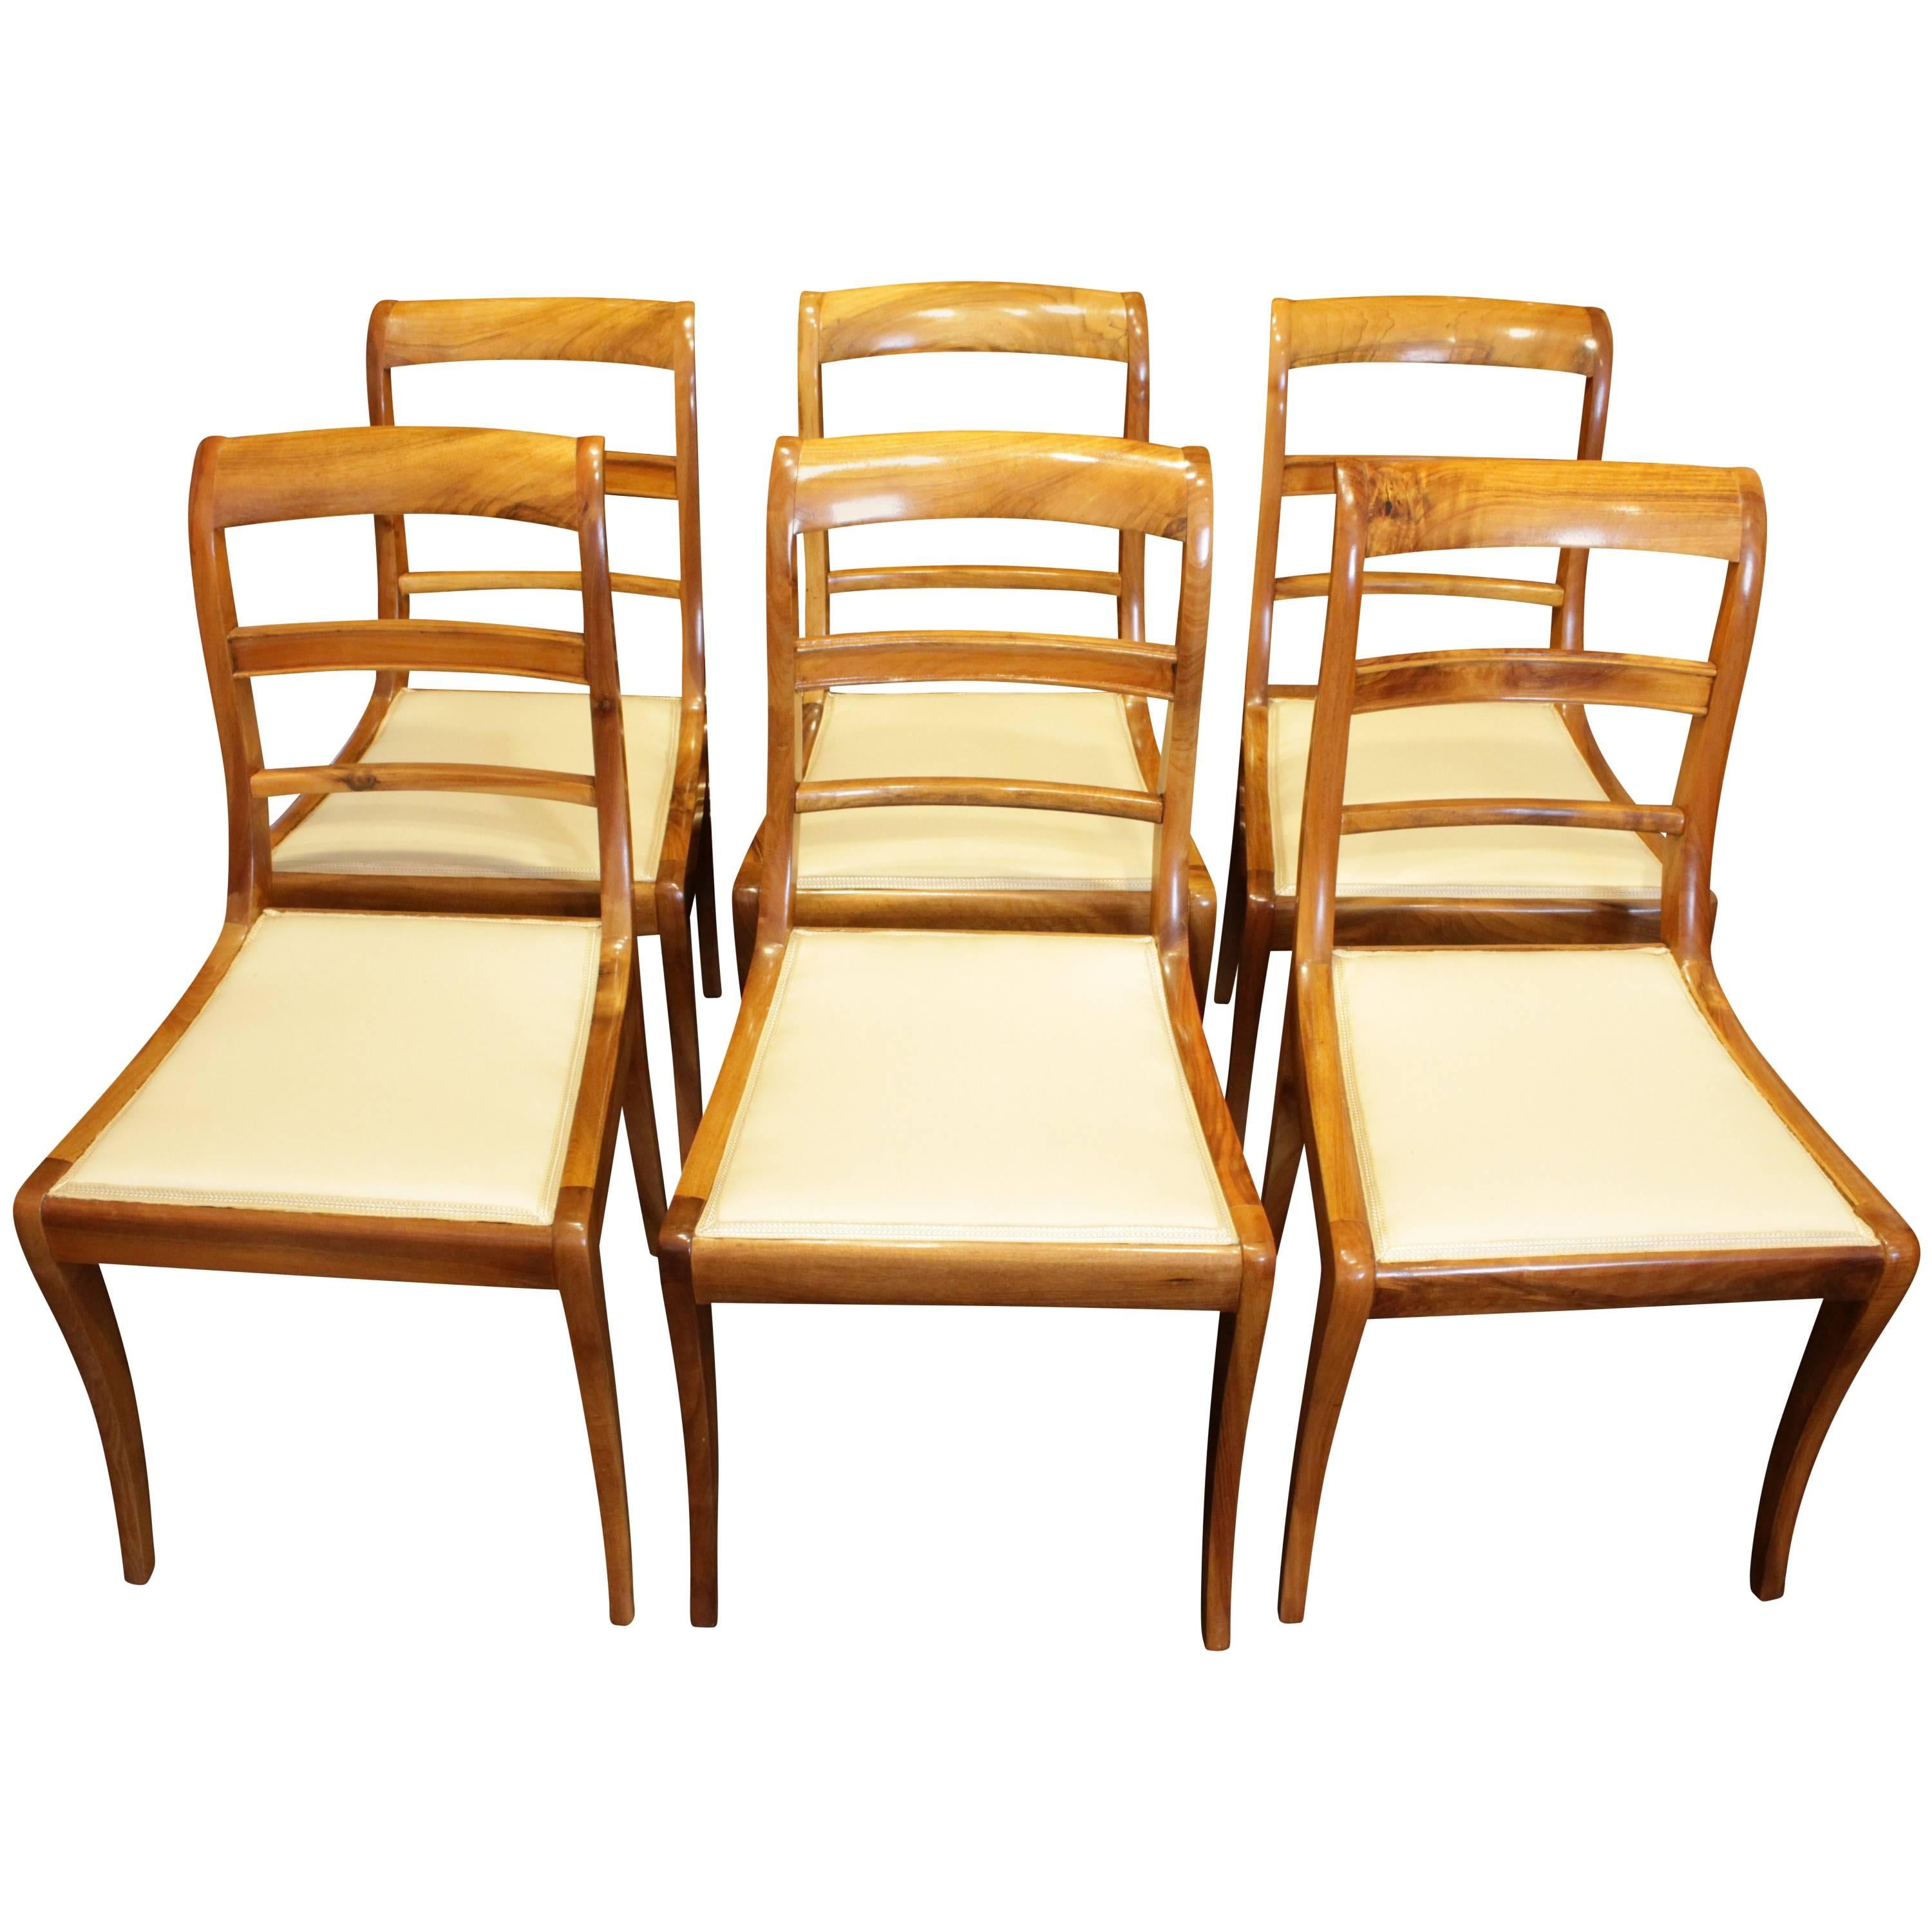 19th Century, Set of Six Solid Walnut Biedermeier Chairs from Germany For Sale